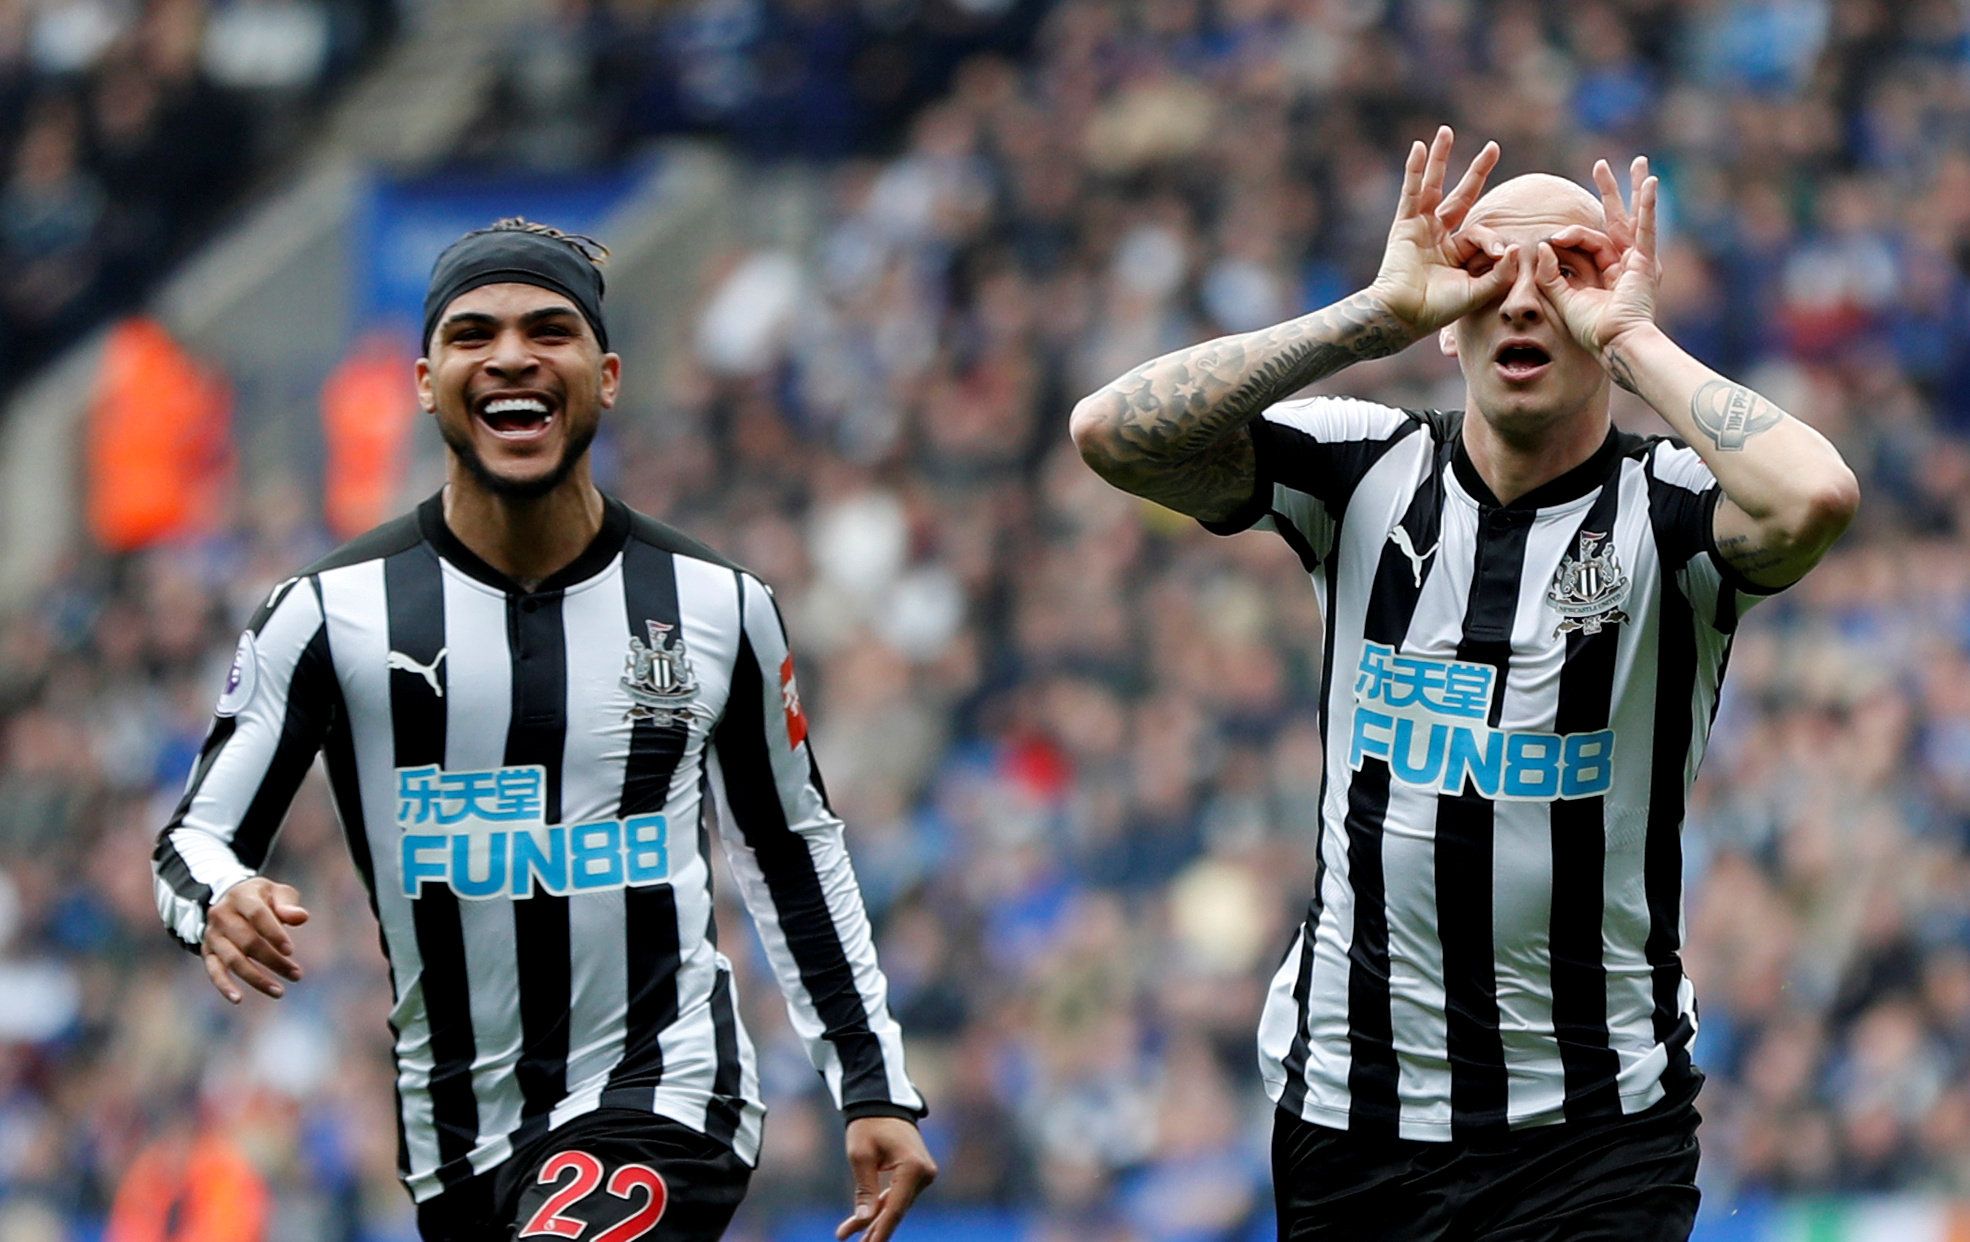 Soccer Football - Premier League - Leicester City vs Newcastle United - King Power Stadium, Leicester, Britain - April 7, 2018   Newcastle United's Jonjo Shelvey celebrates scoring their first goal with DeAndre Yedlin    REUTERS/Darren Staples    EDITORIAL USE ONLY. No use with unauthorized audio, video, data, fixture lists, club/league logos or 